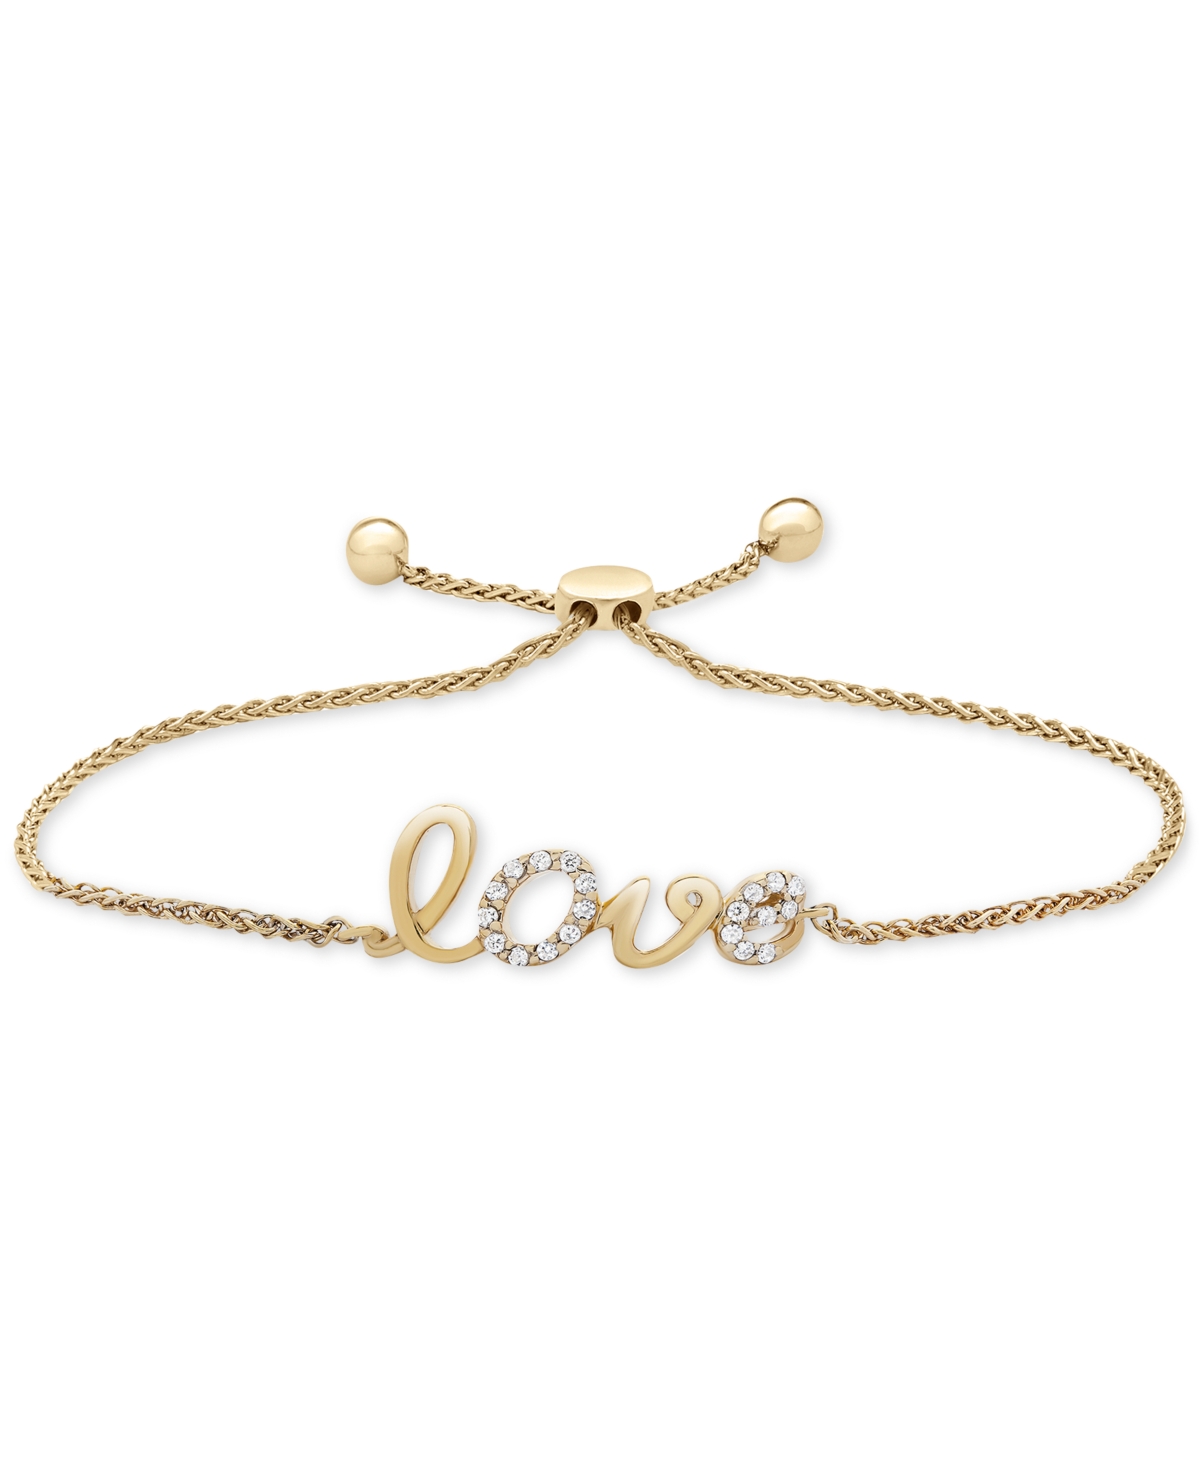 Wrapped Diamond Love Bolo Bracelet (1/10 ct. t.w.) in 14k Gold, Created for Macy's - Yellow Gold